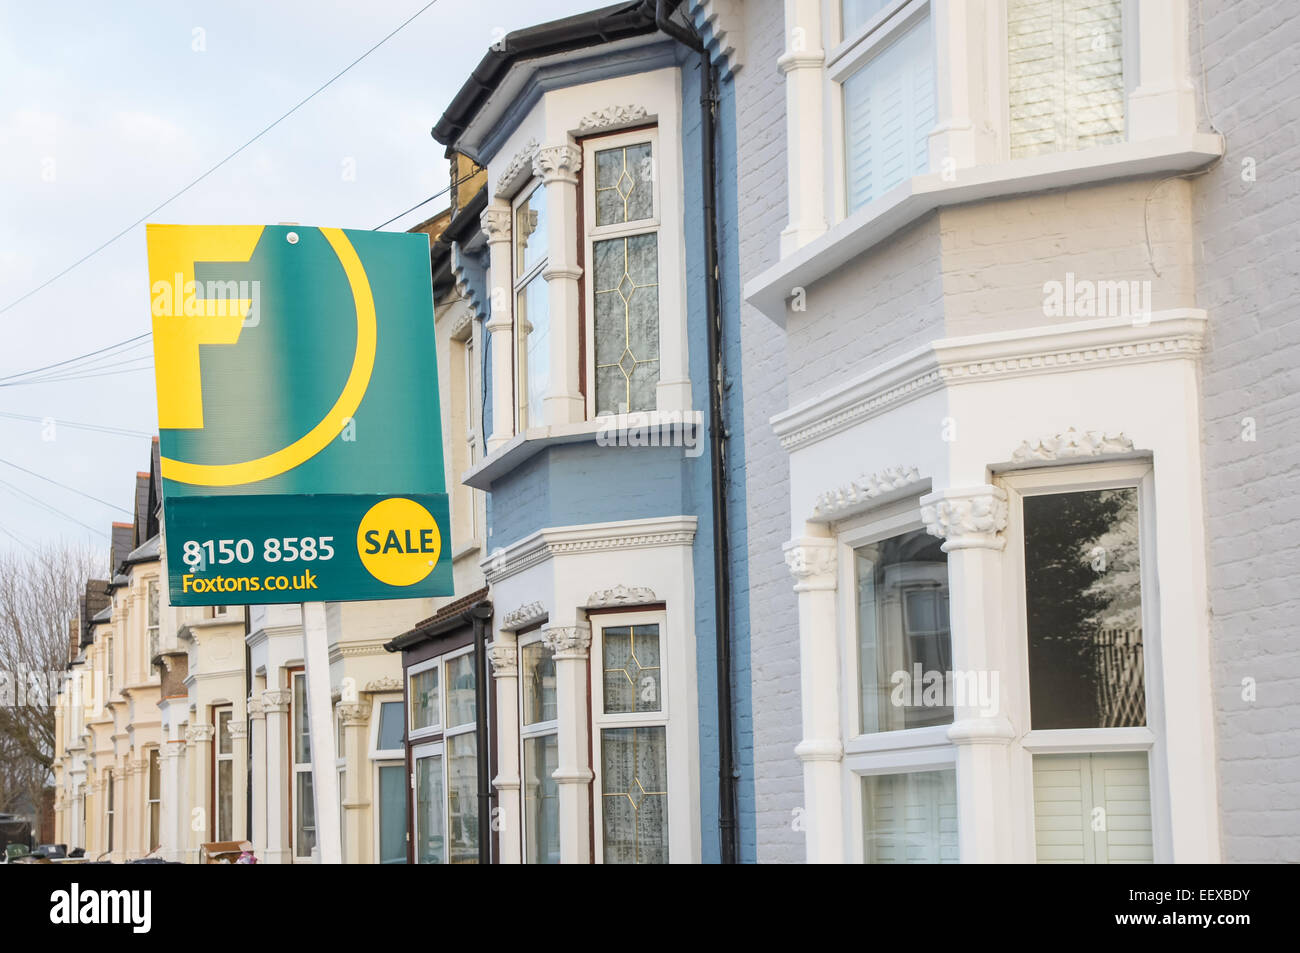 Foxtons real estate sale sign outside terraced houses in East London England United Kingdom UK Stock Photo